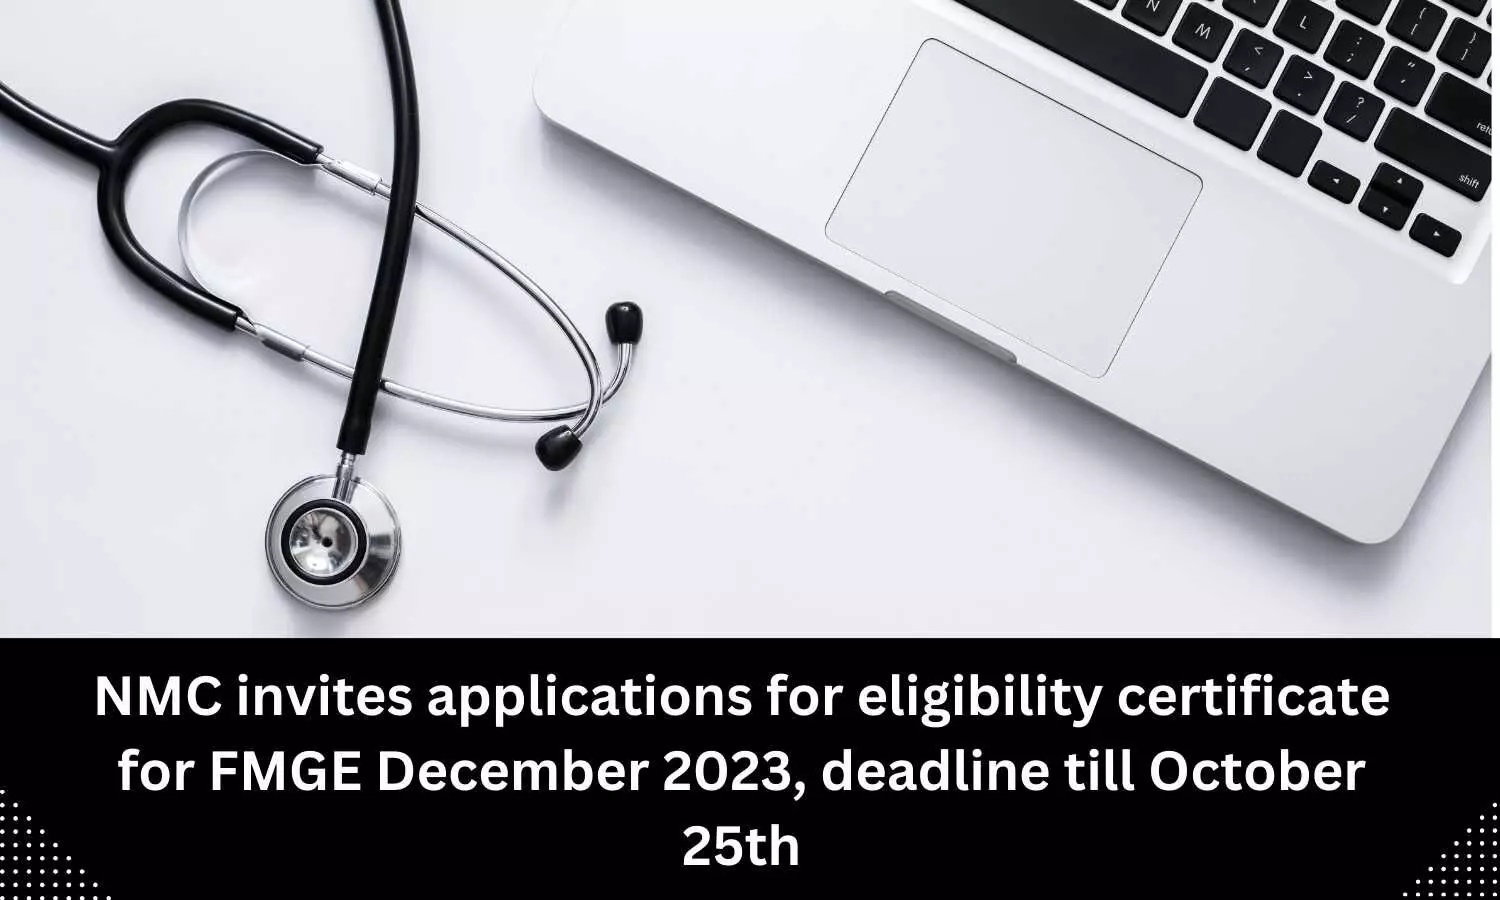 NMC invites applications for eligibility certificate for FMGE December 2023